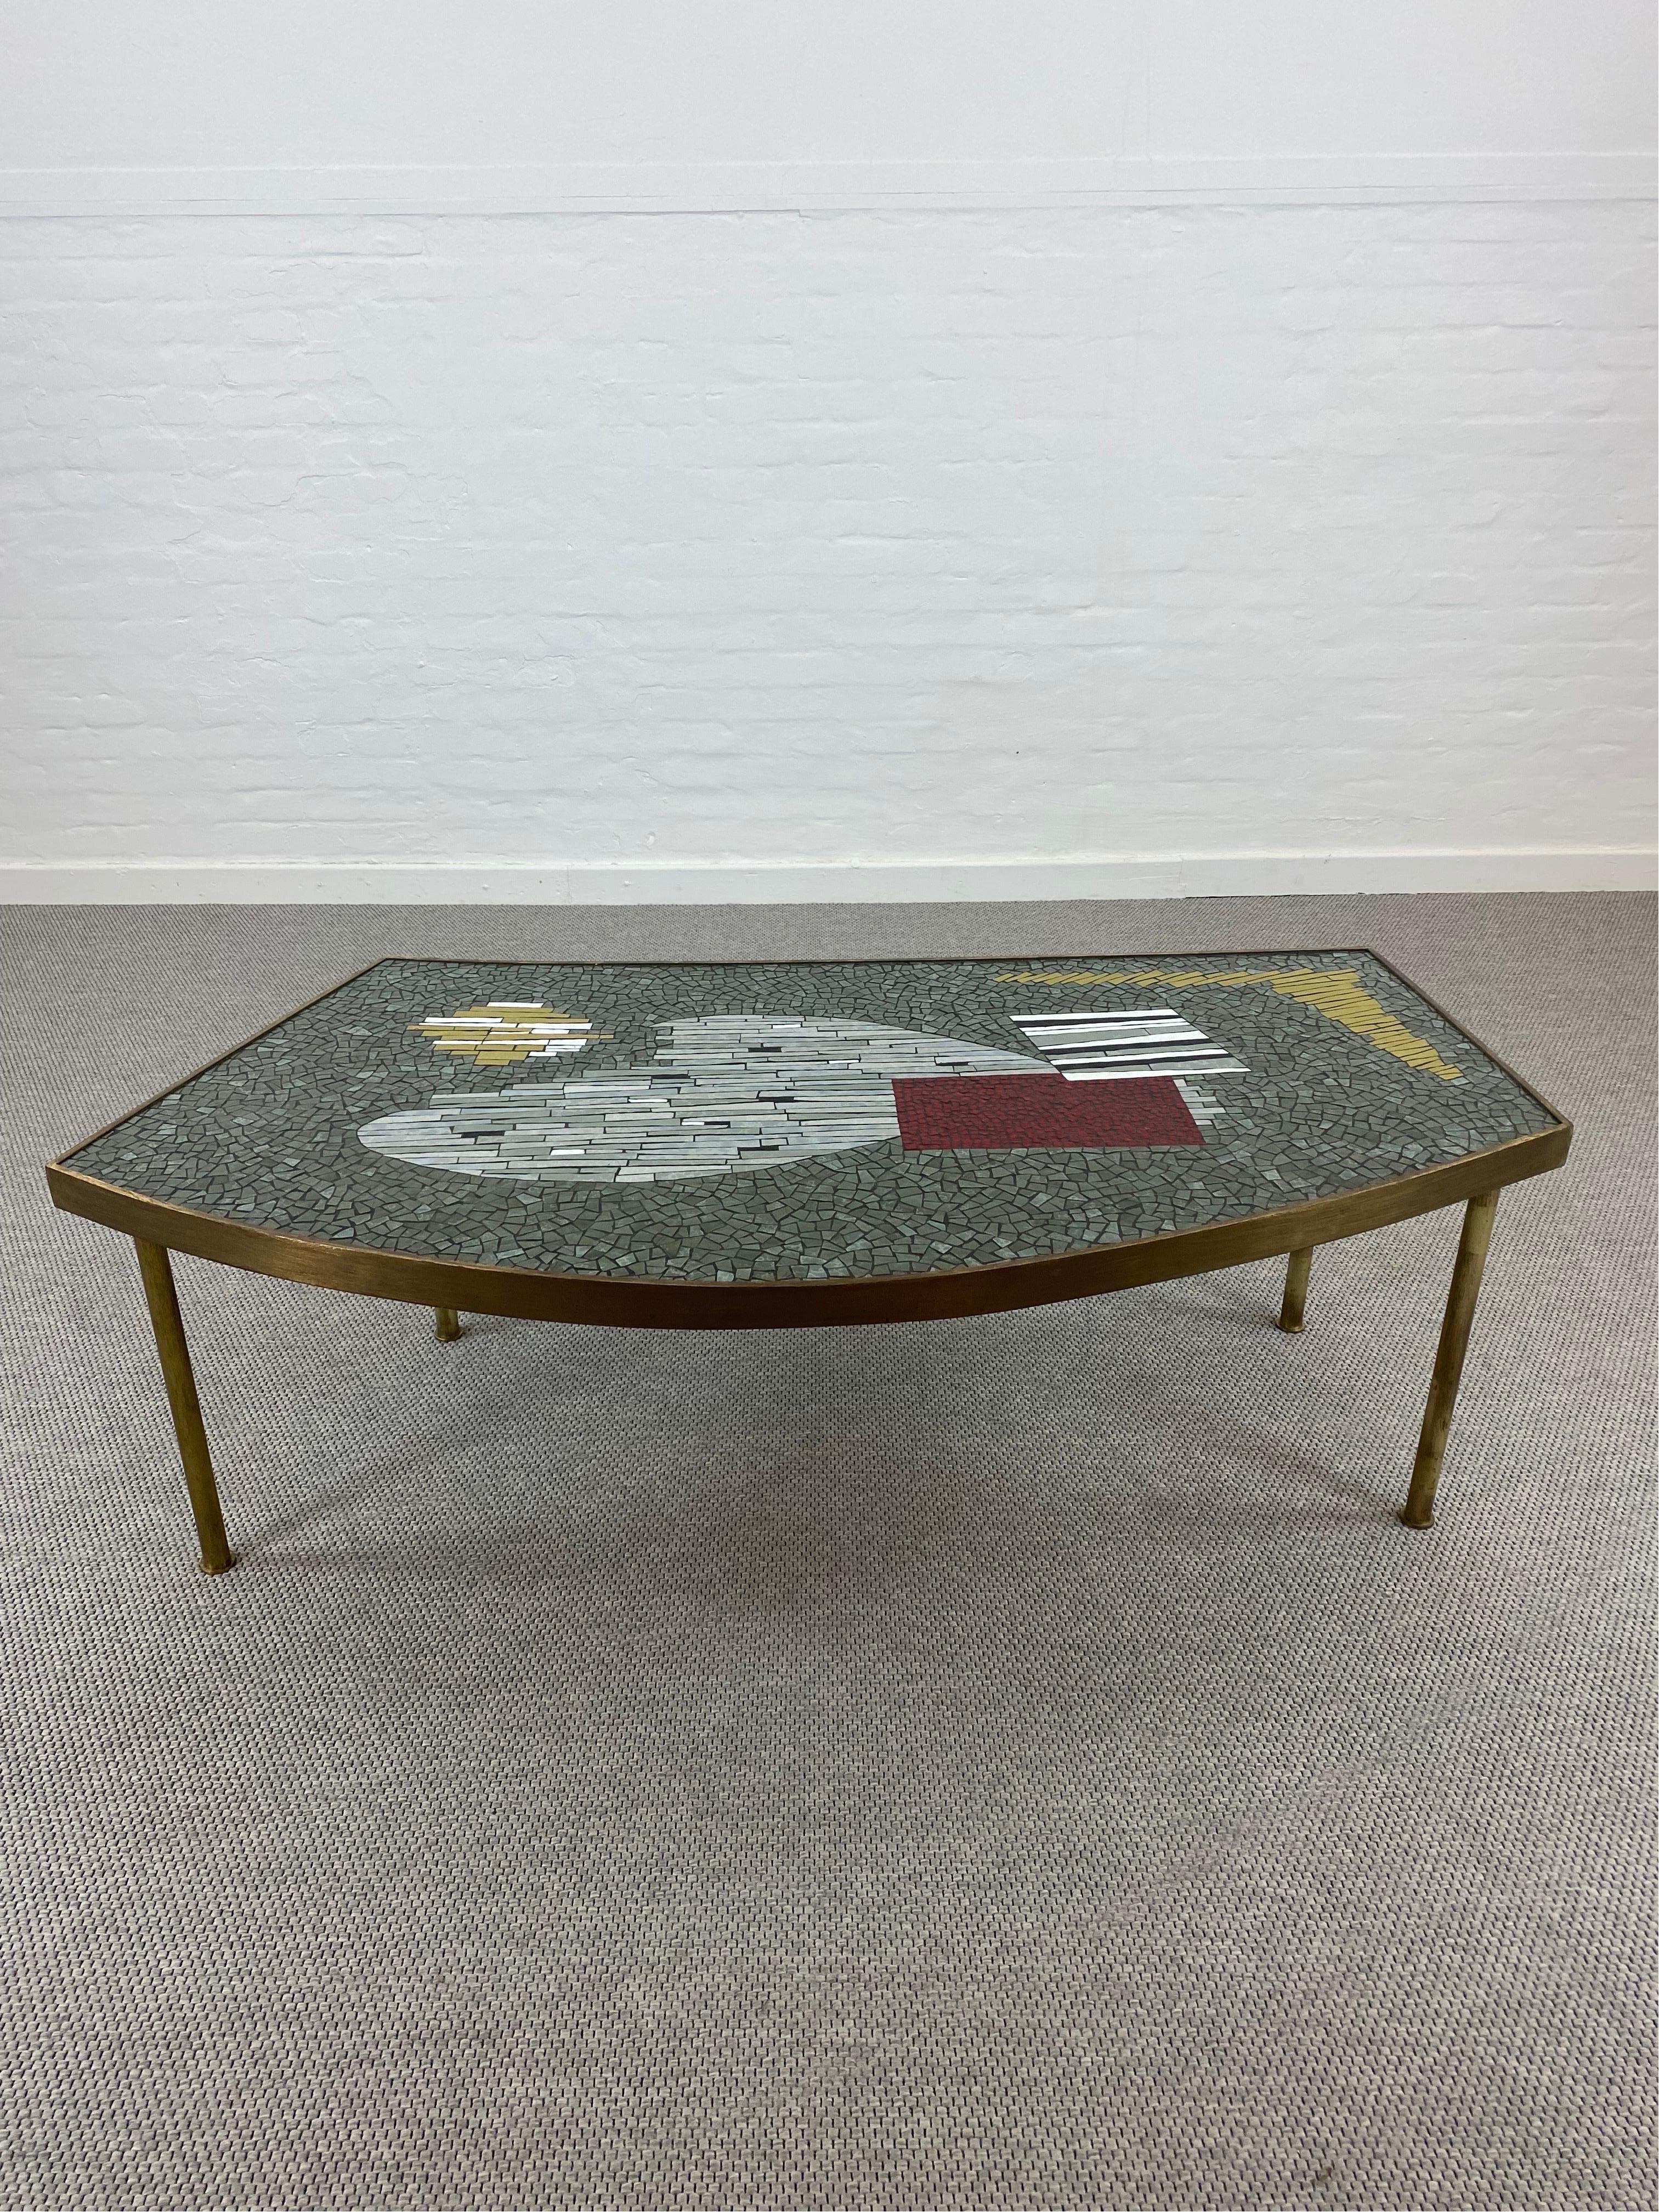 A 1950s Glas-Mosaic table by German Artist Berthold Muller-Oerlighausen (1893-1979).
Very nice colors and a elegant form is here combined to create a nearly perfect icon of the 1950s.
The glas tiles inlay give this table a brilliant depth and show